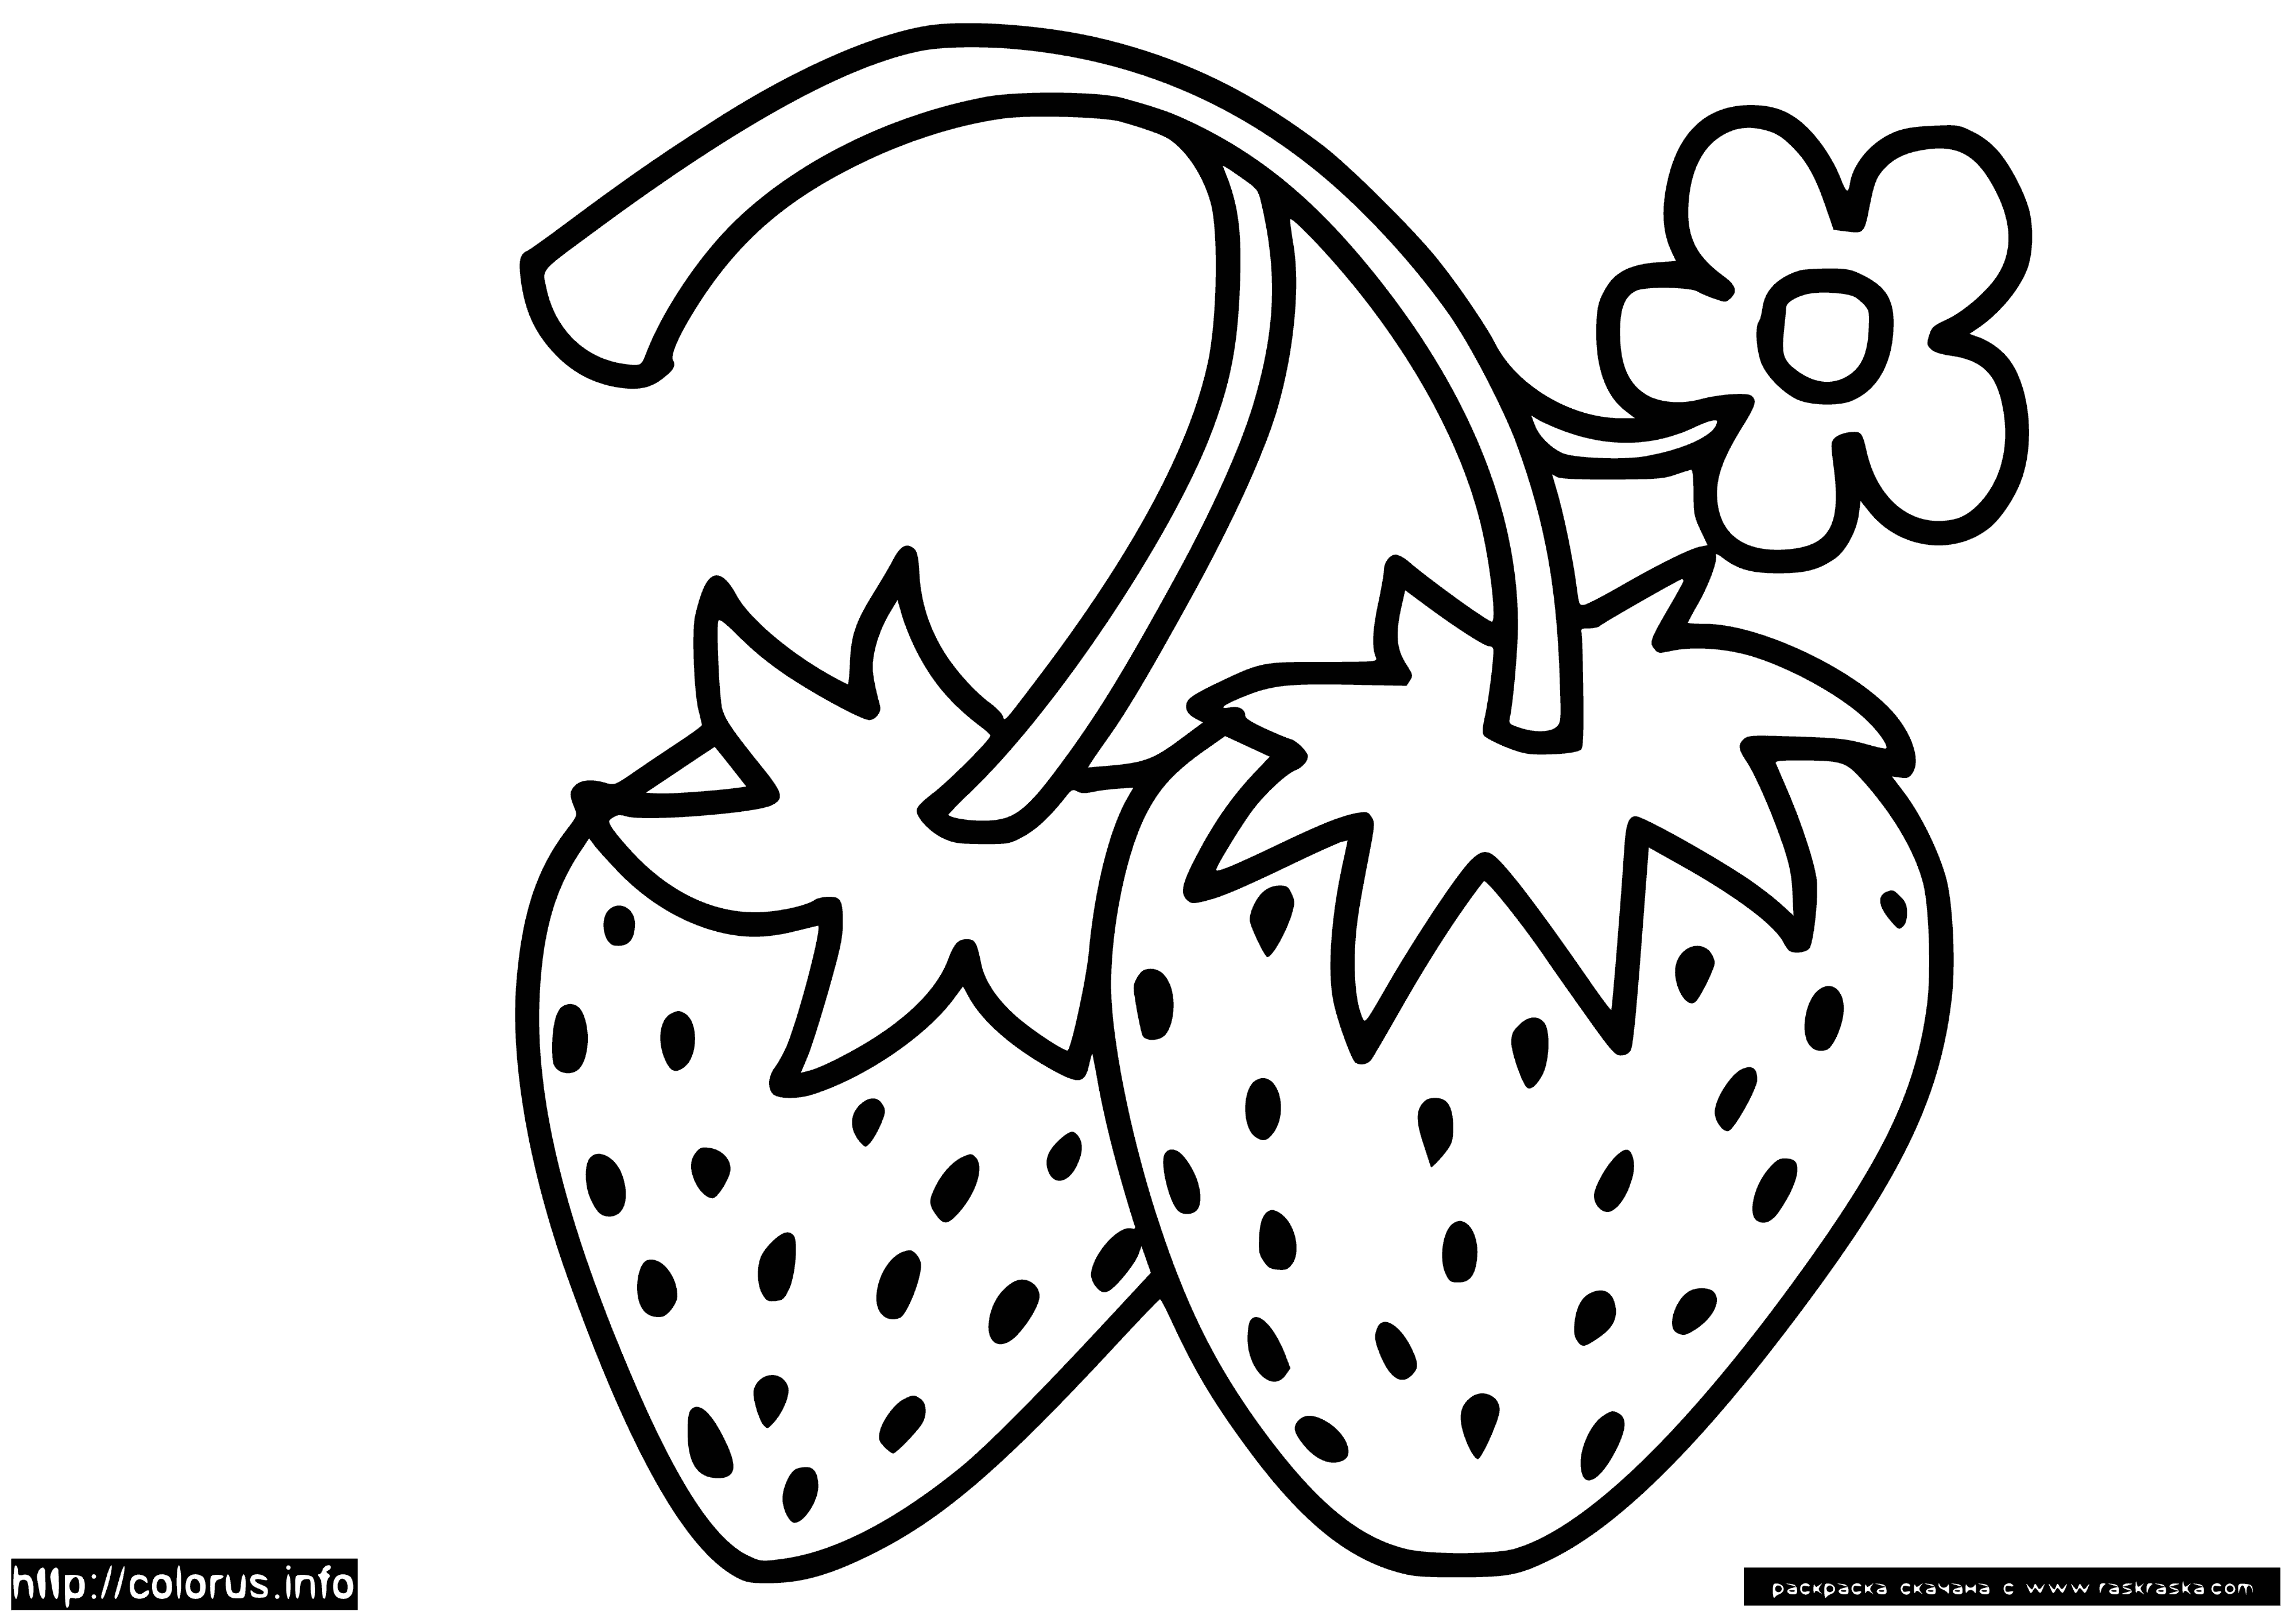 Strawberry coloring page